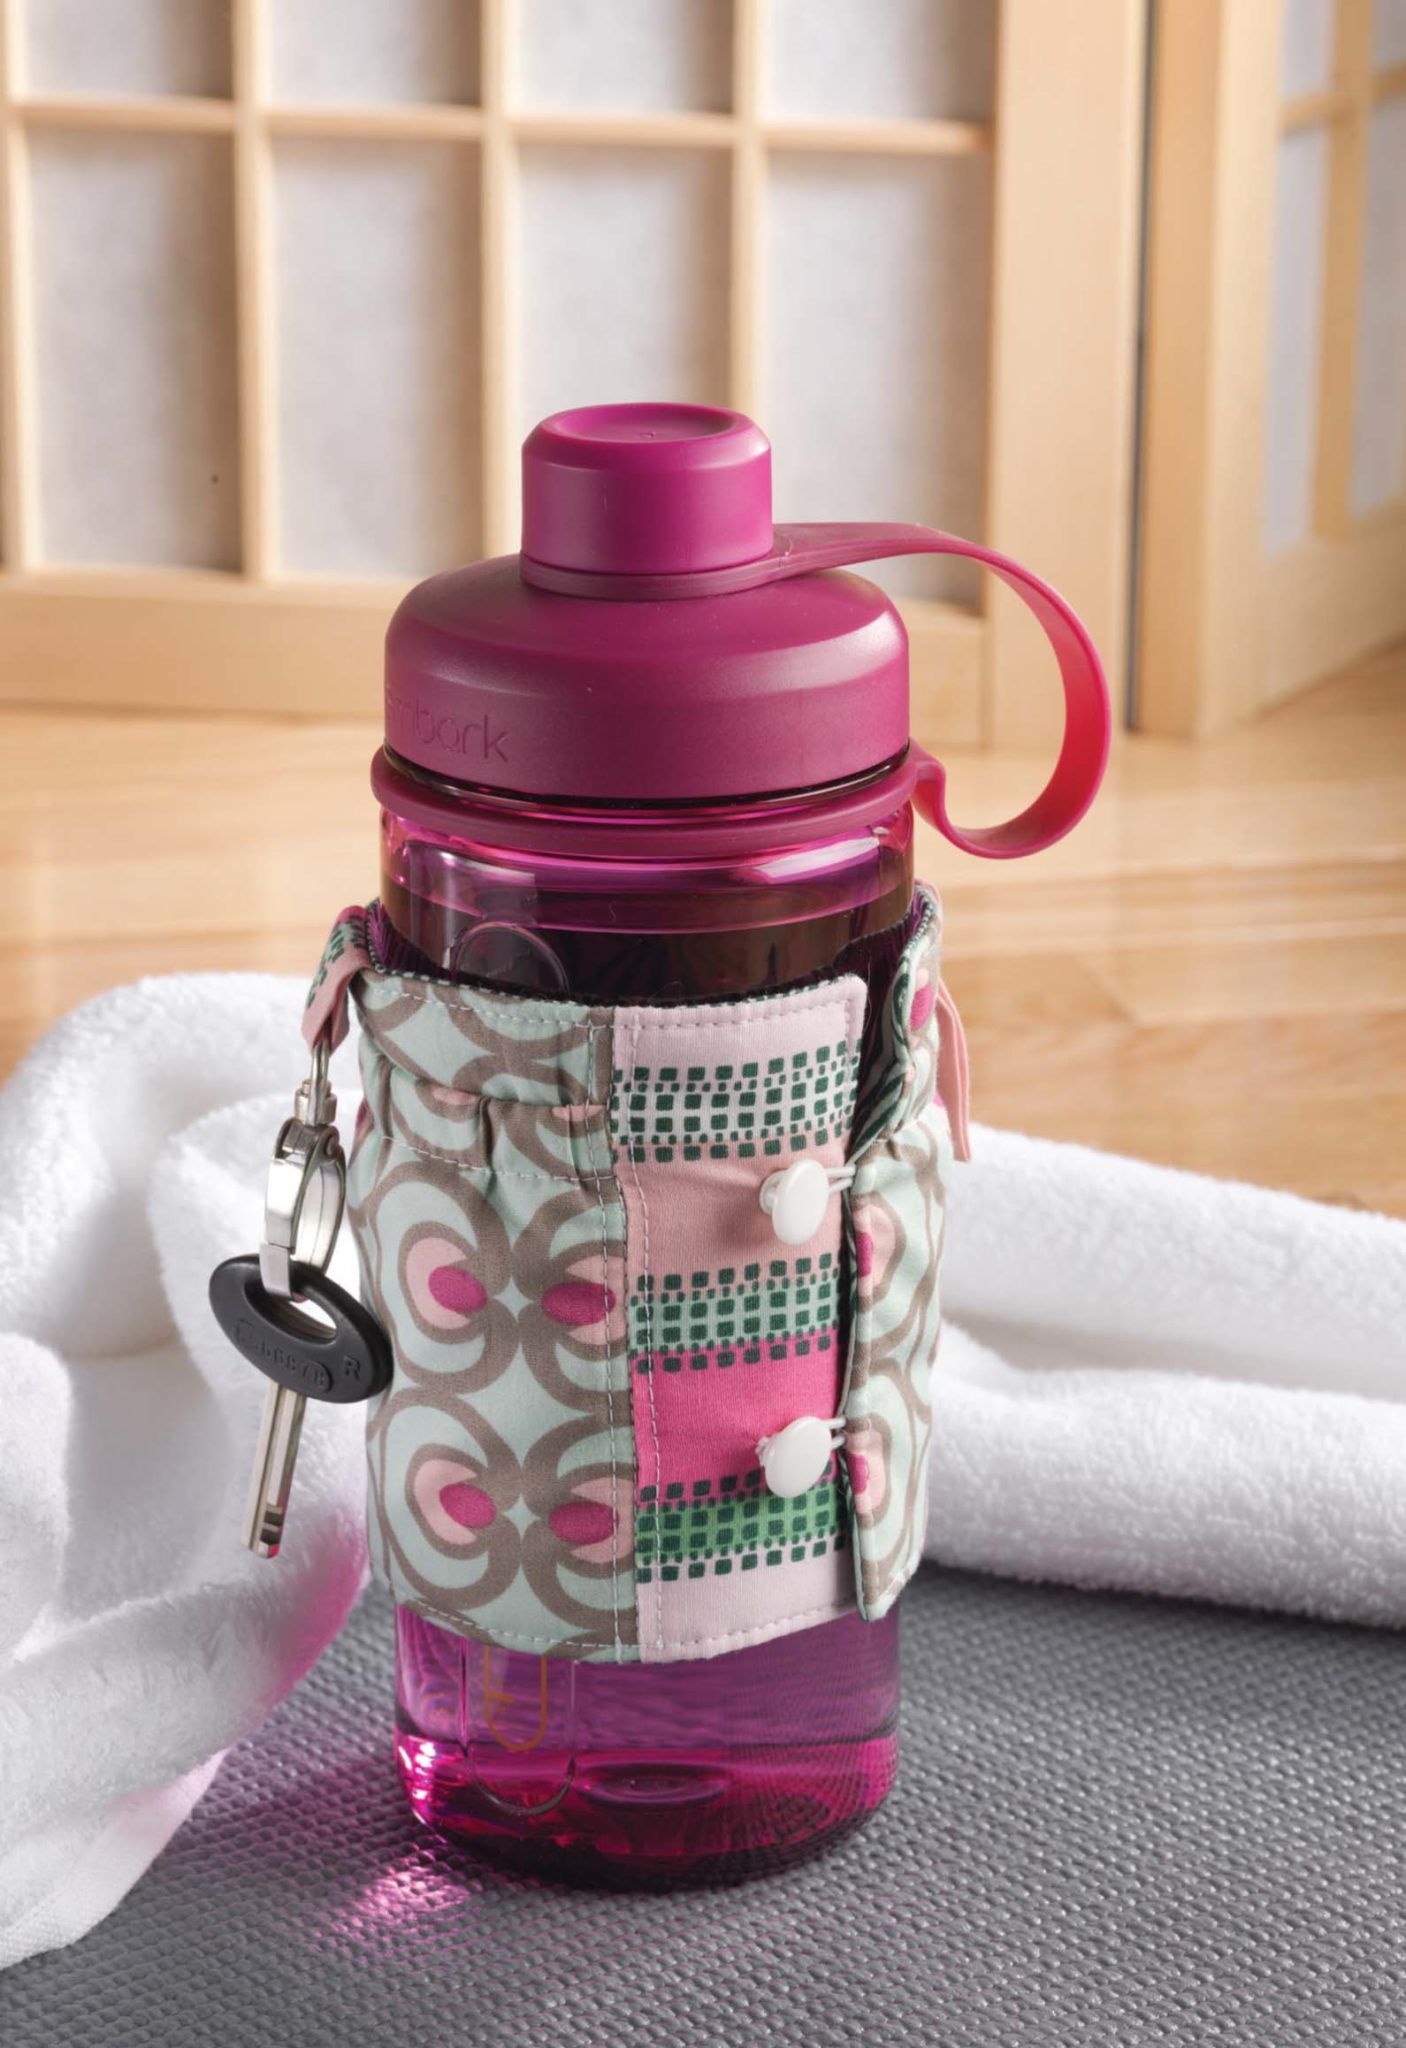 Carryall Bottle Cuff Pattern Download - Sew Daily